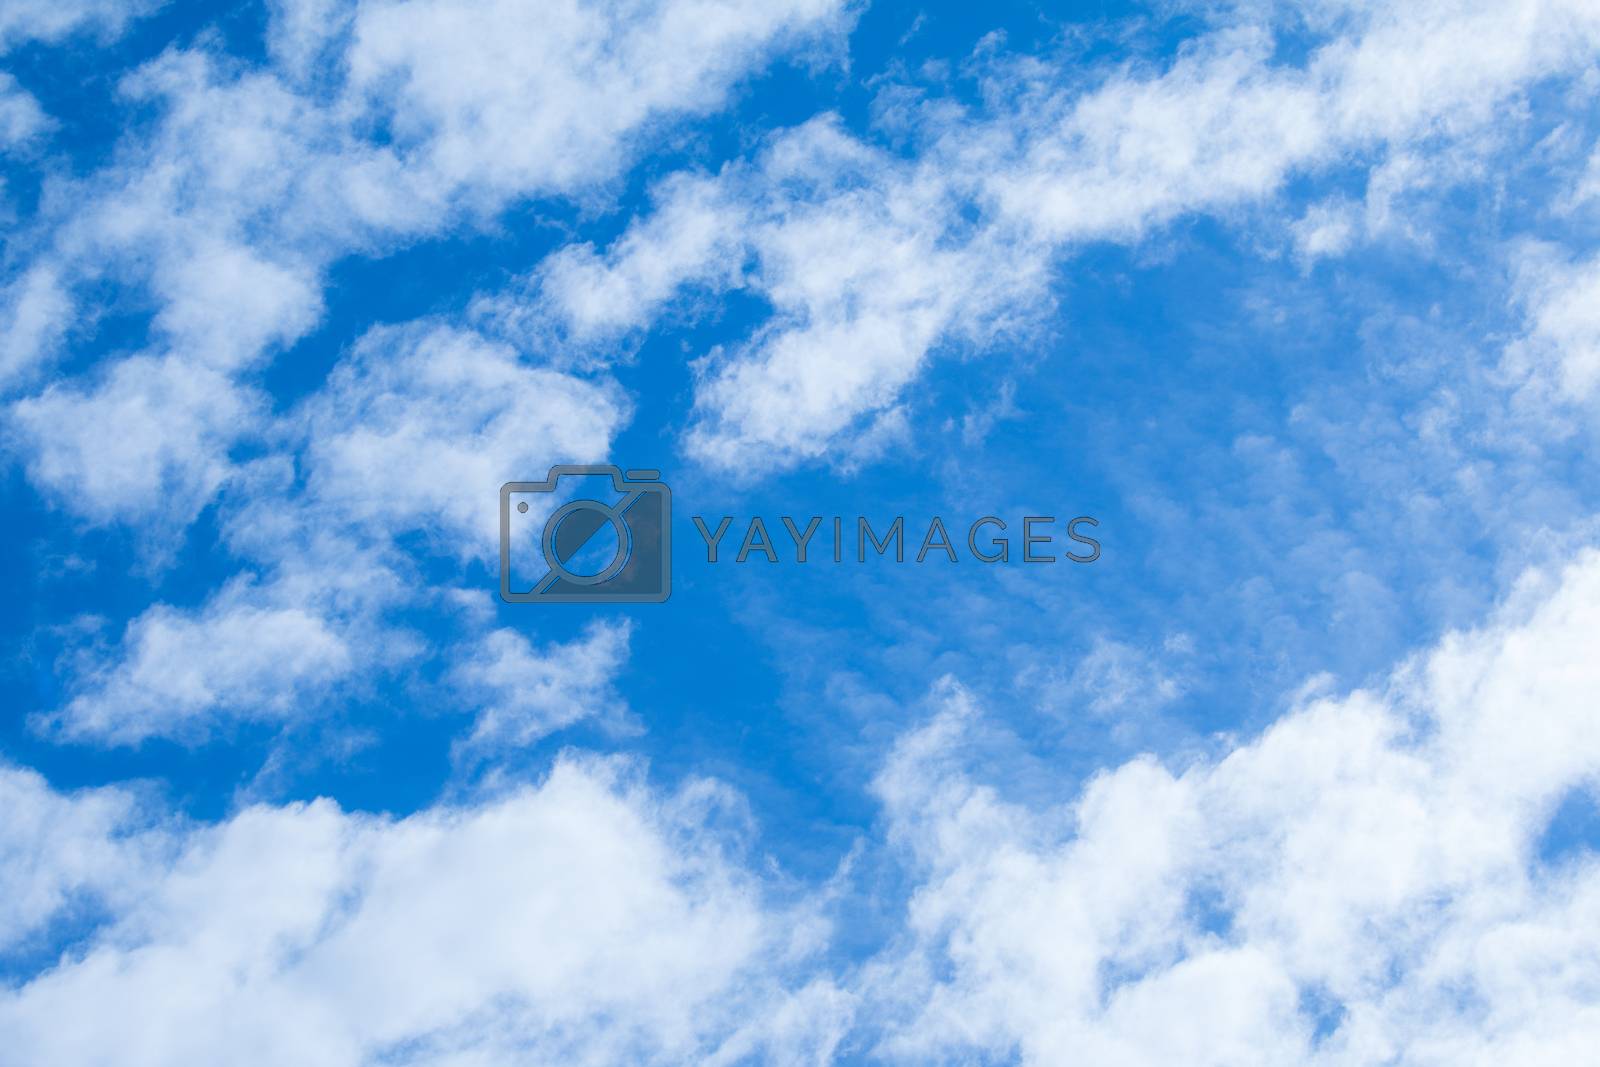 Royalty free image of Beauty blue sky and clouds in daytime in Thailand by N_u_T